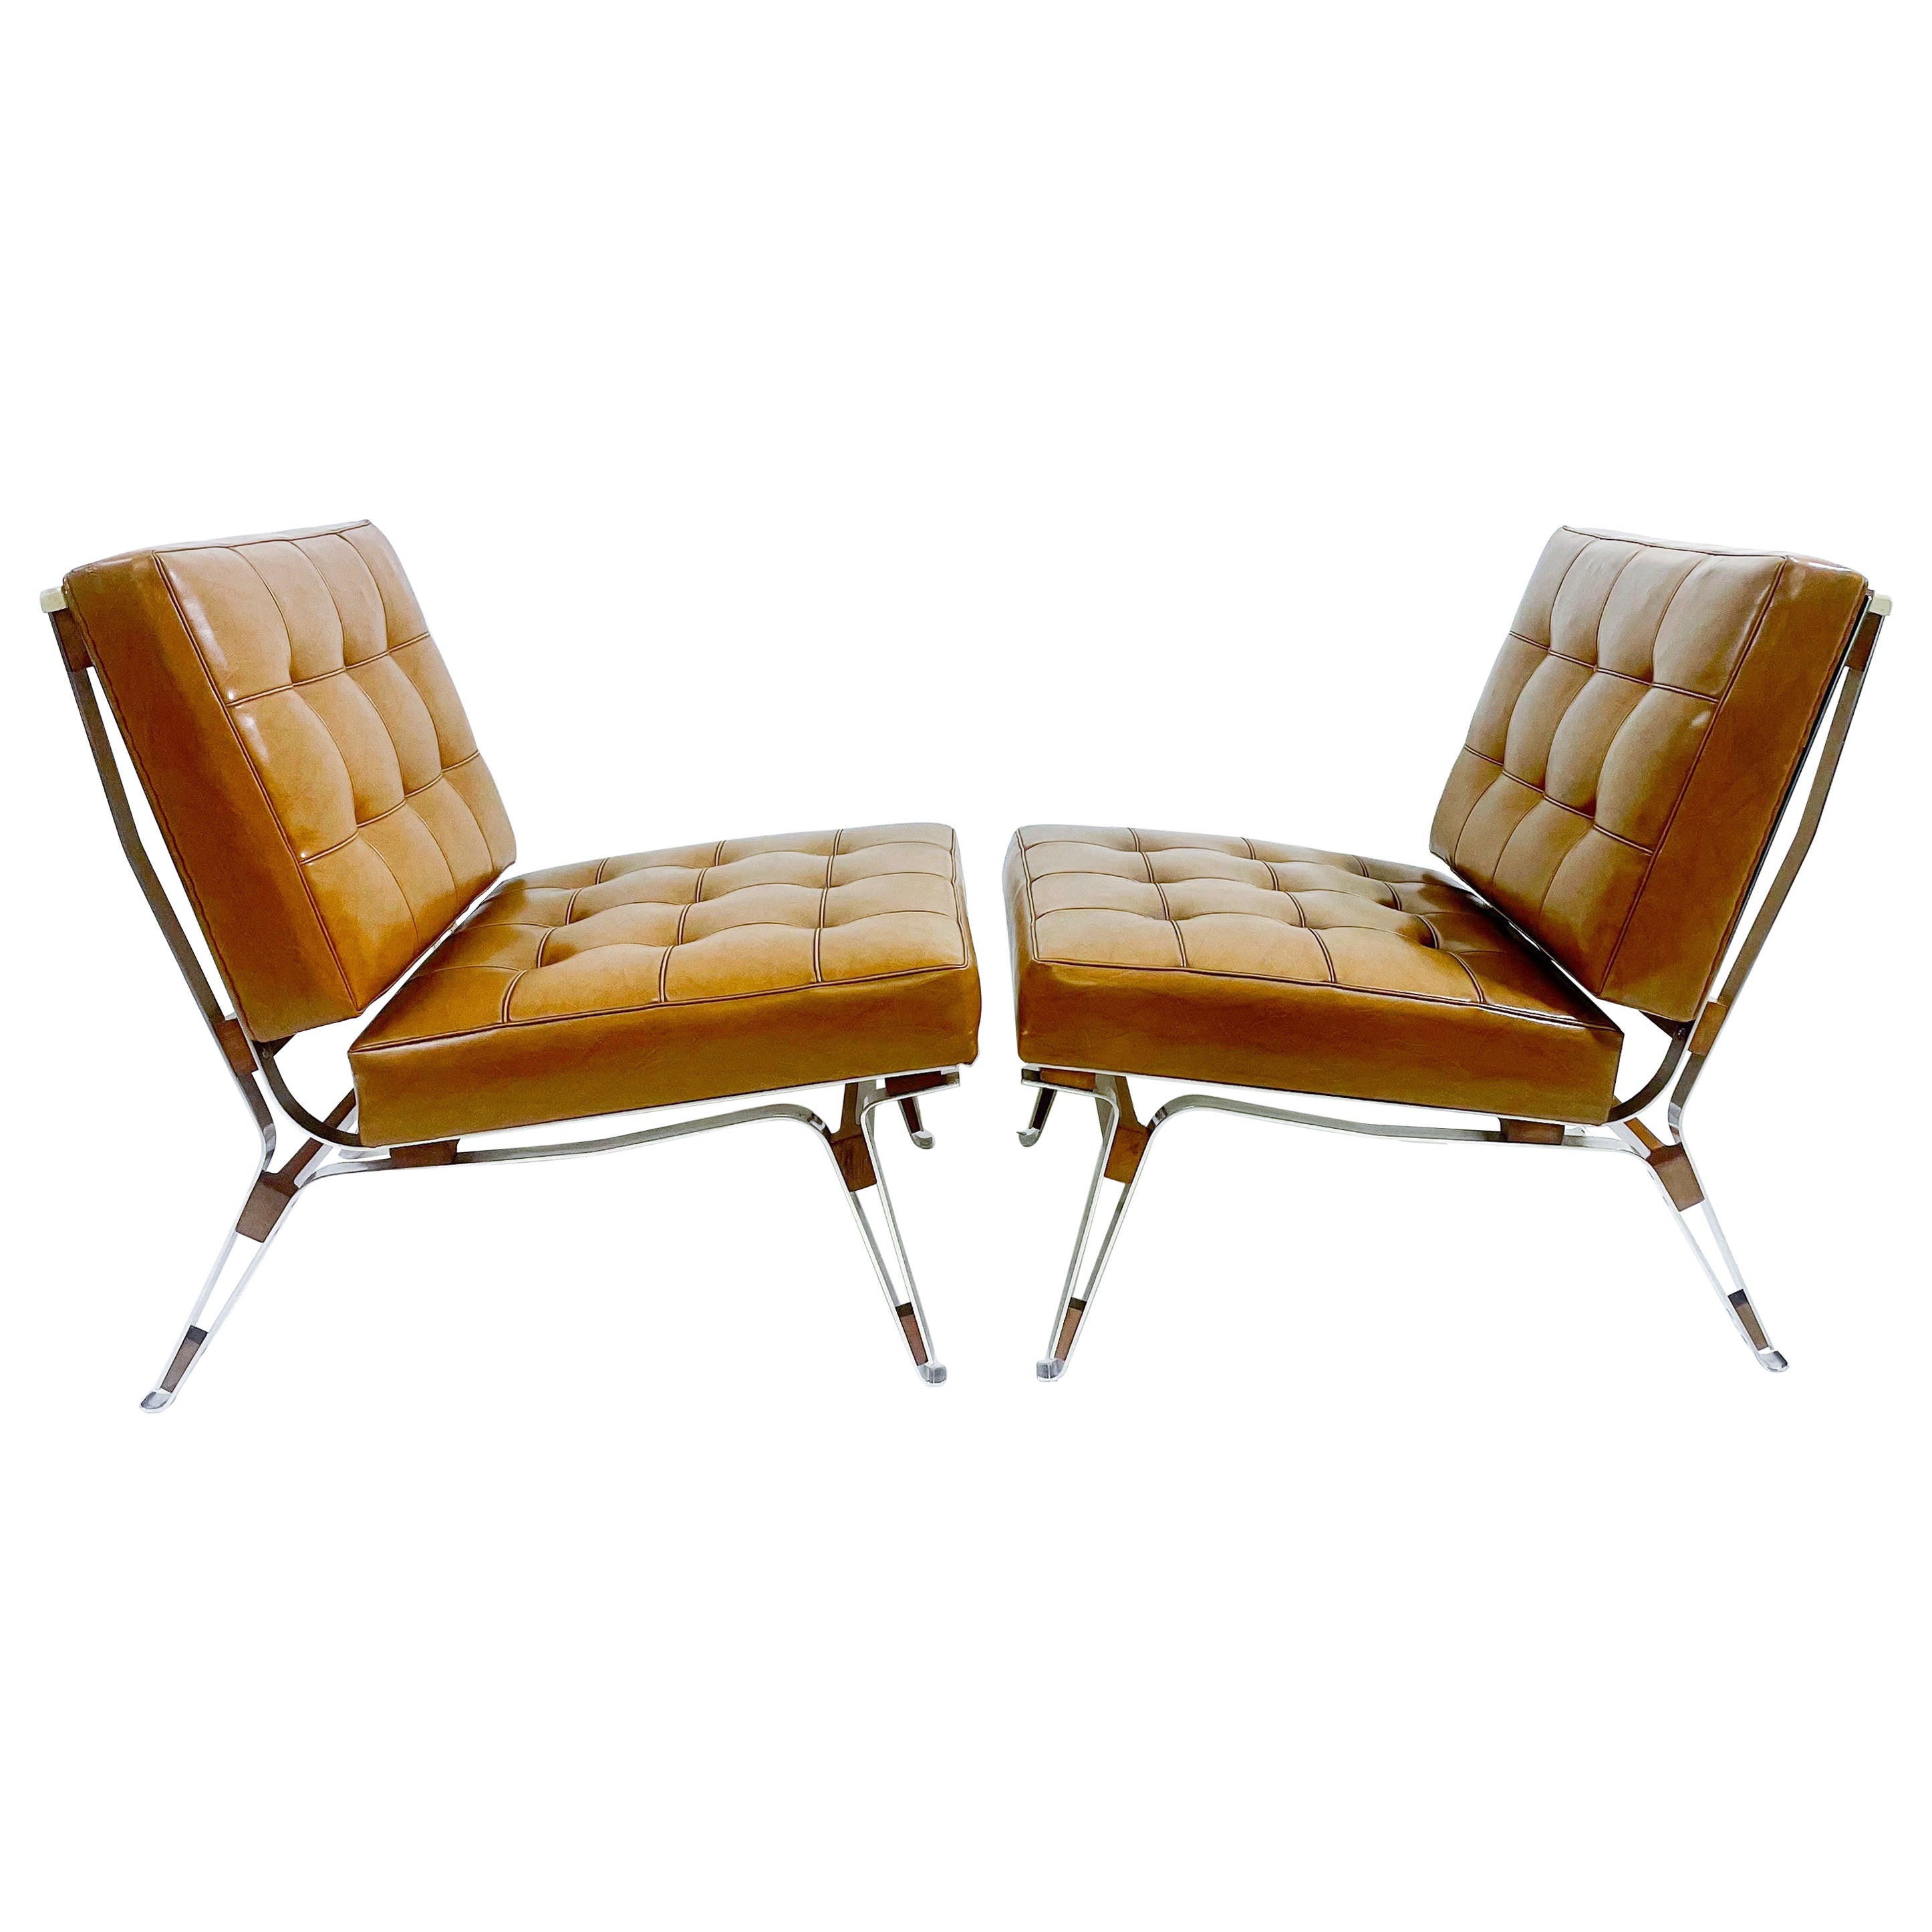 Mid-Century Modern Pair of Armchairs Model 856 by Ico Parisi, Italy, 1950s For Sale